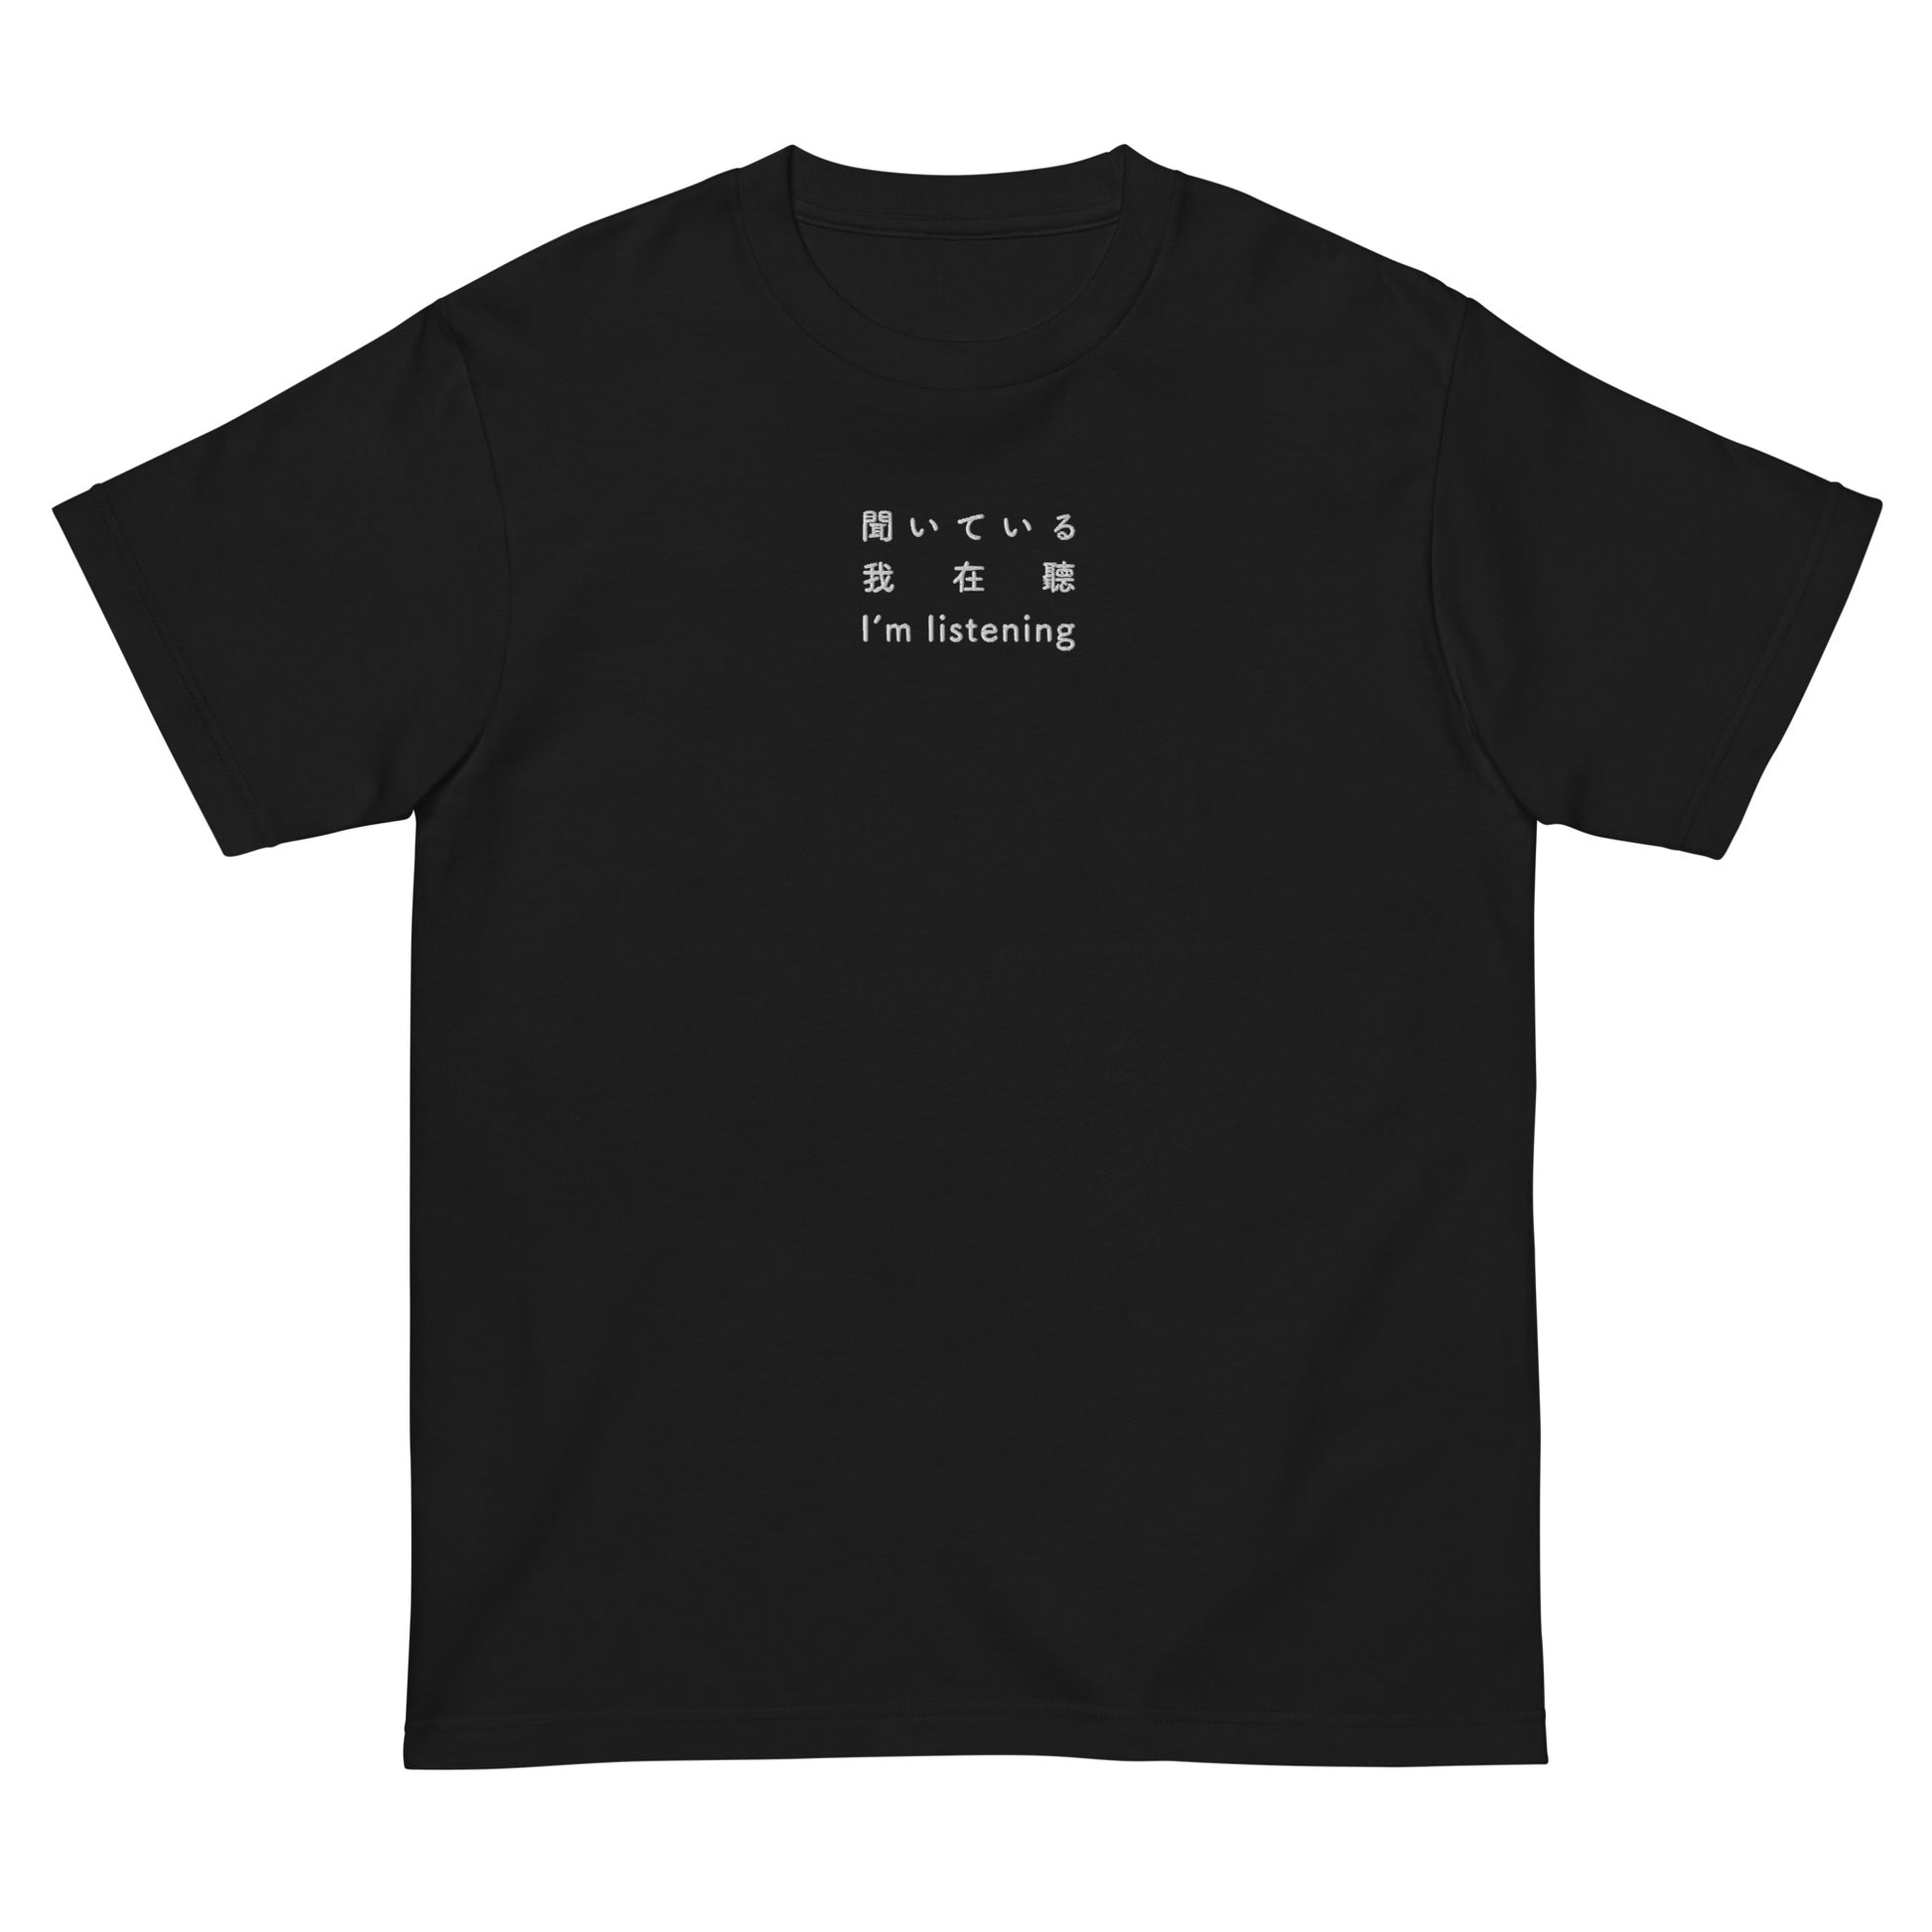 Black High Quality Tee - Front Design with an White Embroidery "I'm listening" in Japanese,Chinese and English